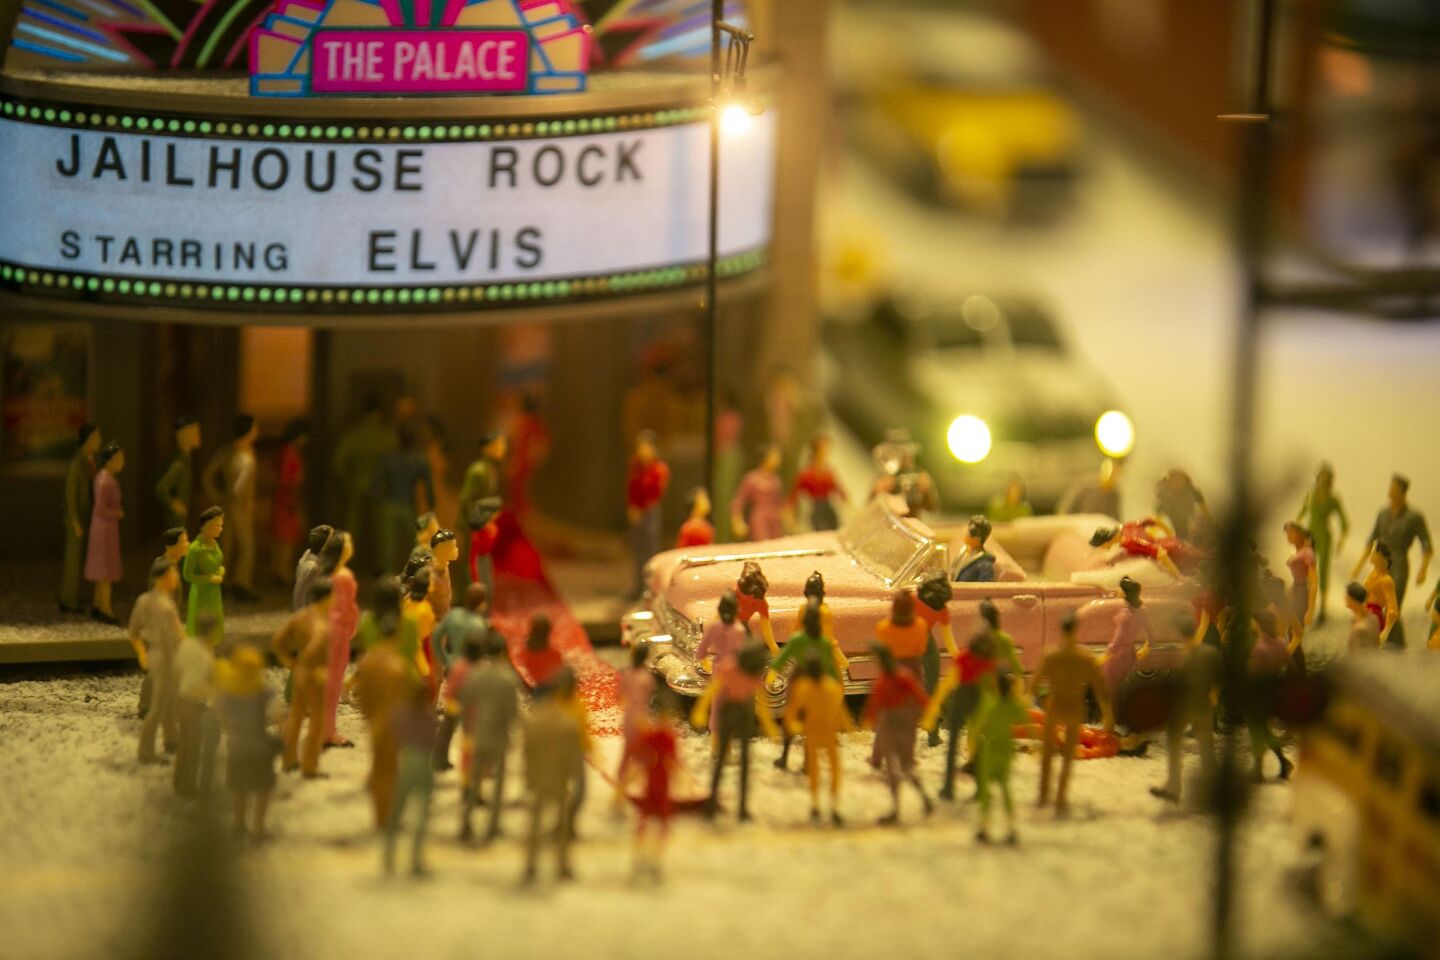 David Lizerbram and his wife Mana Monzavi took over the Old Town Model Railroad Depot, which was in danger of closing. The extensive train layout and its detailed and sometimes humorous dioramas was photographed on Friday, Dec. 13, 2019, at its Old Town, San Diego location. Elvis showing up in his pink Cadillac at the Palace theater.